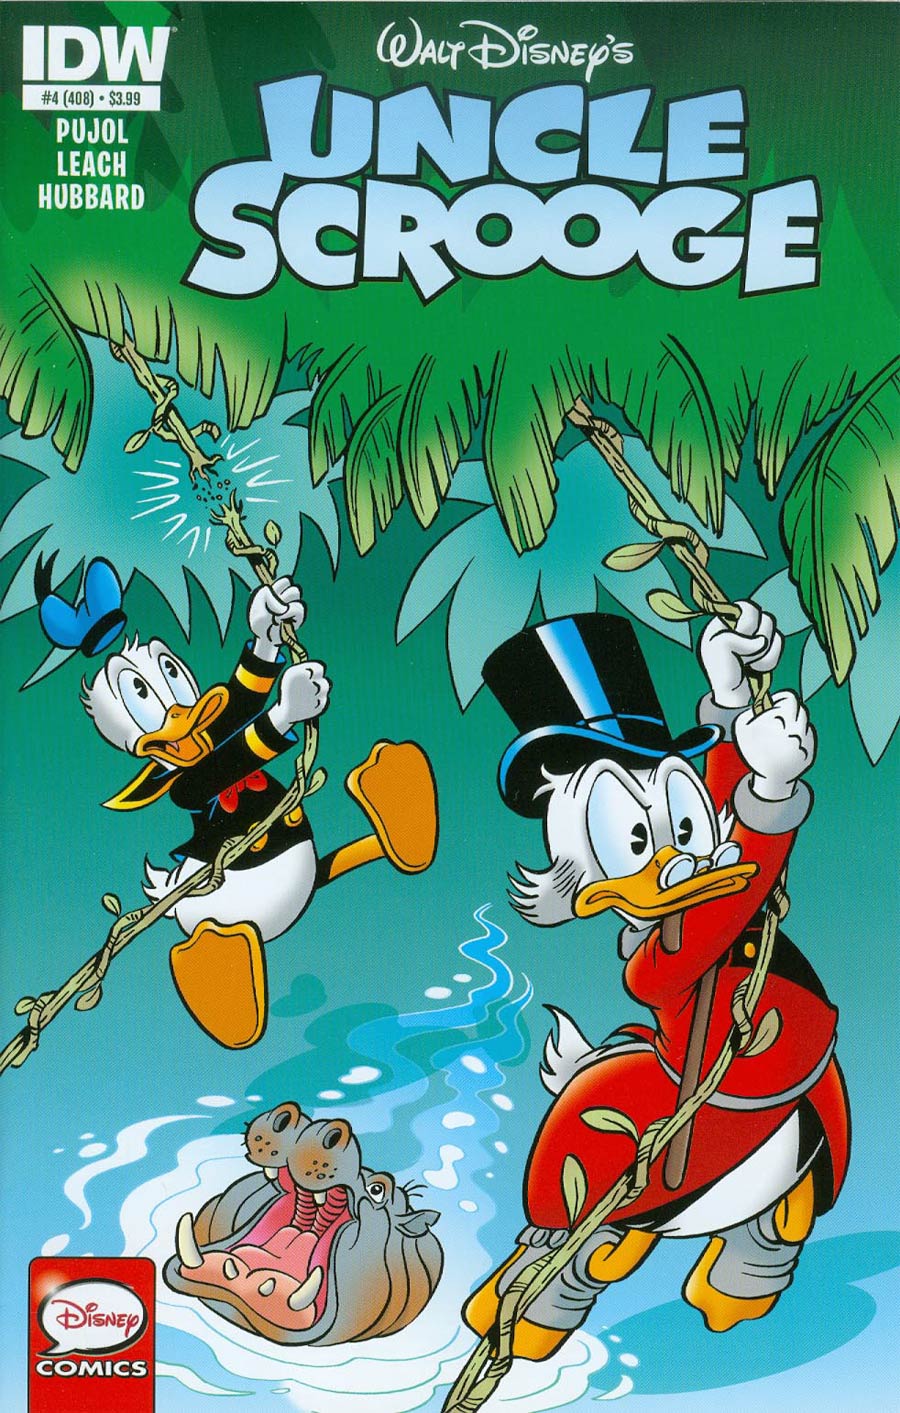 Uncle Scrooge Vol 2 #4 Cover A Regular Miquel Pujol Cover